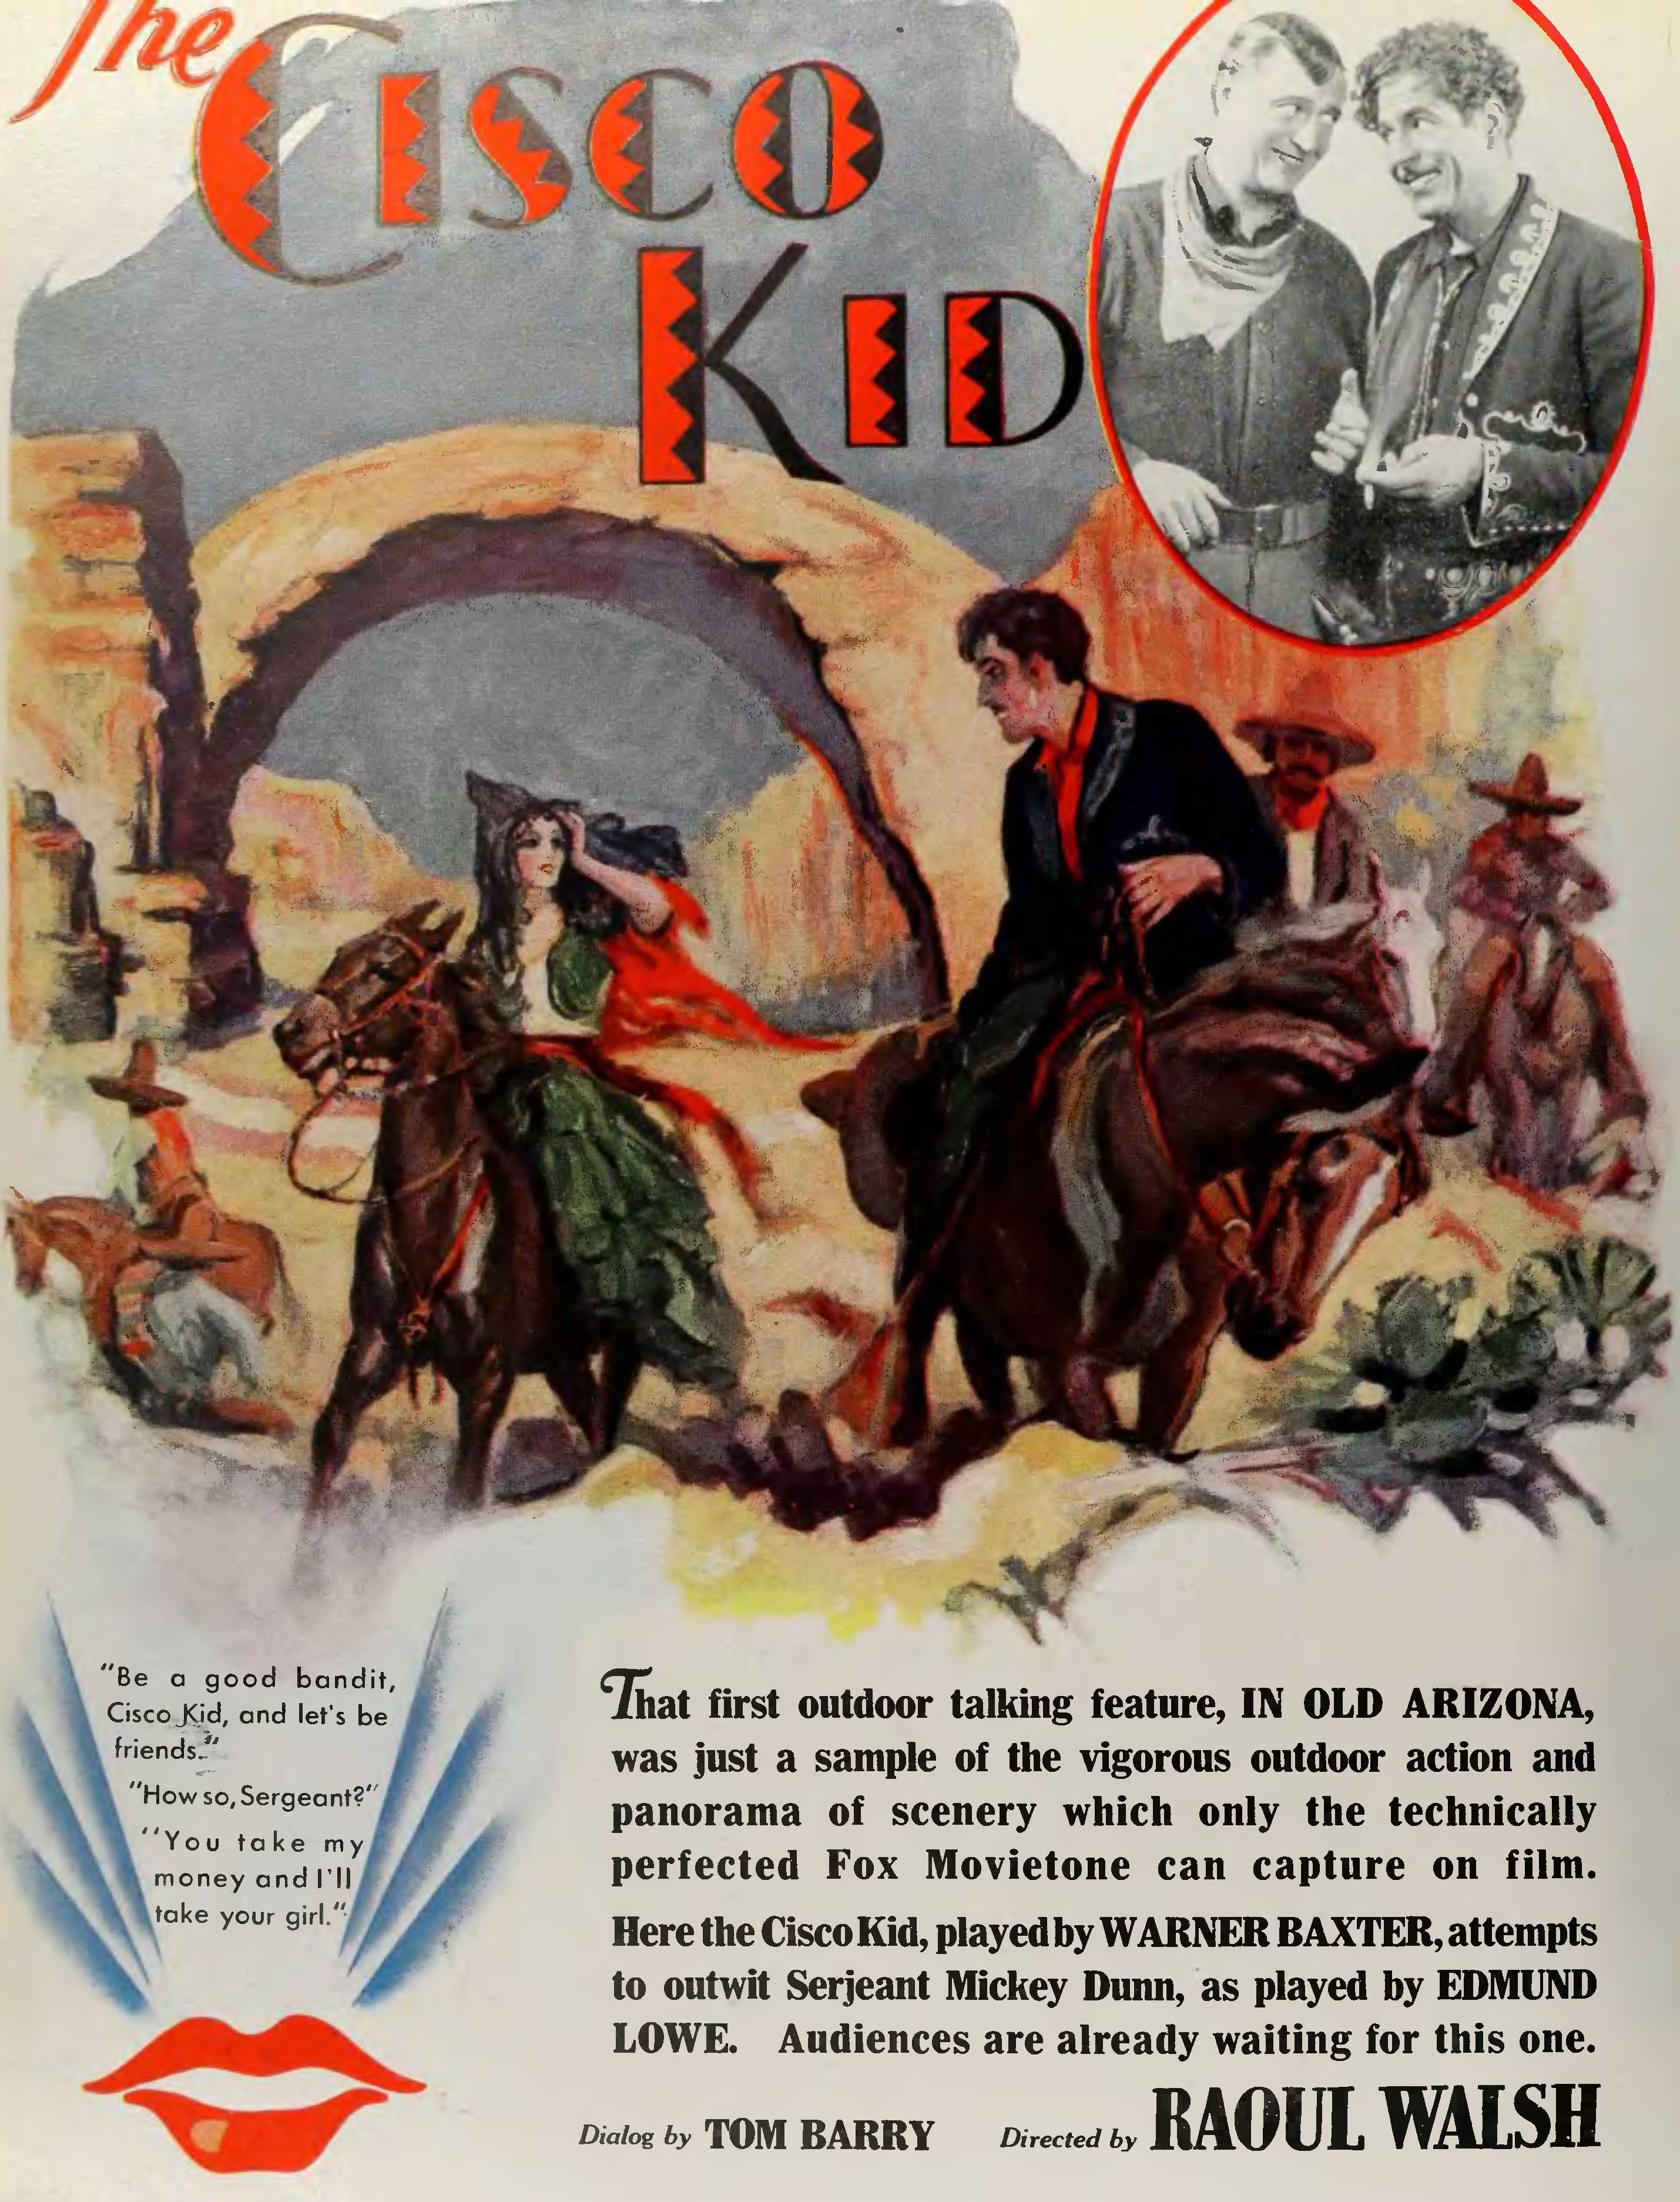 A movie poster for The Cisco Kid, showing a man on a horse talking with a woman on a horse, with three darker skinned men in the background. 